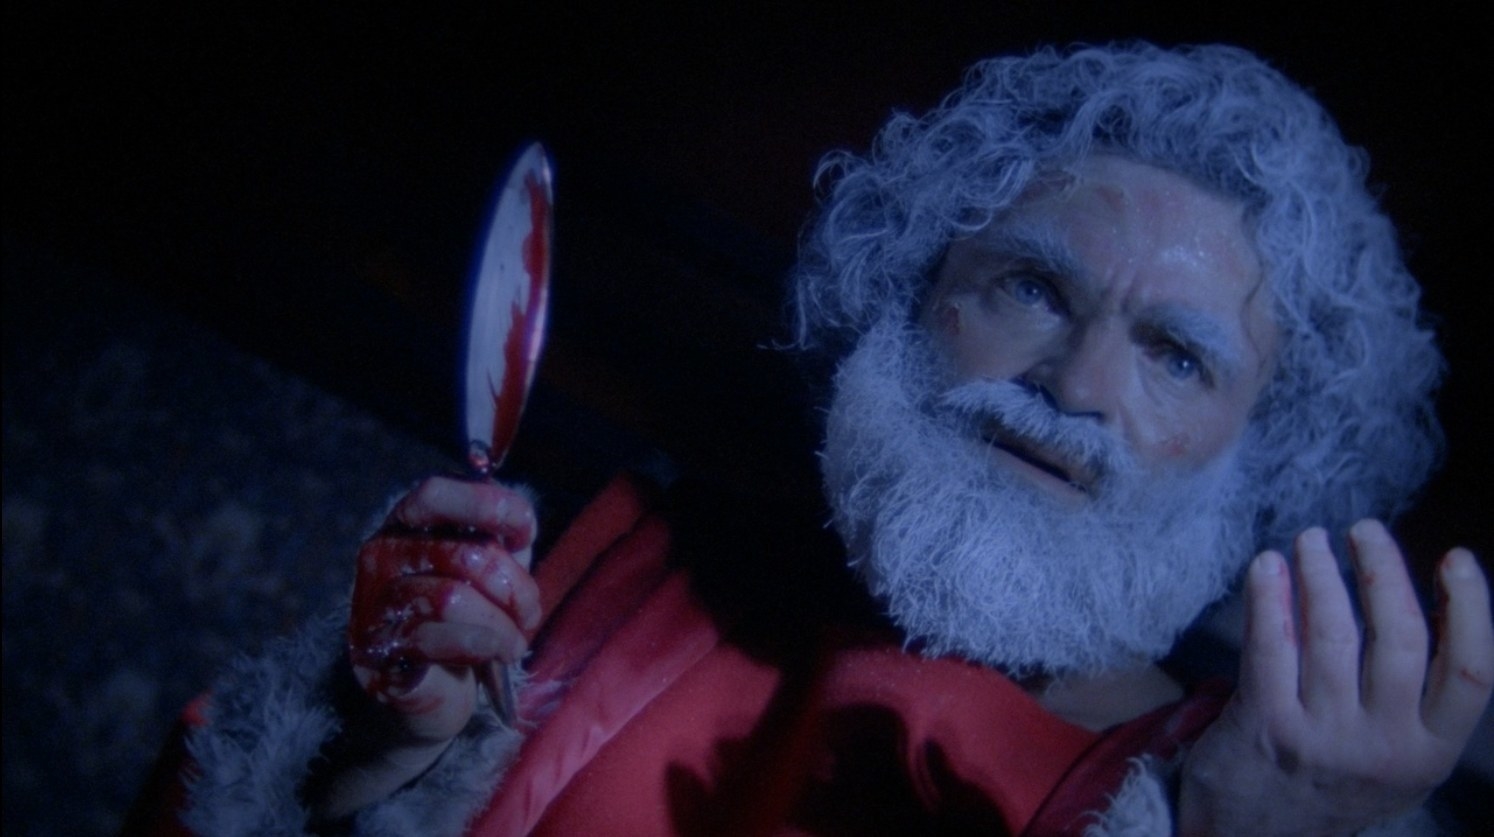 A fake Santa Claus holds up a bloody razor